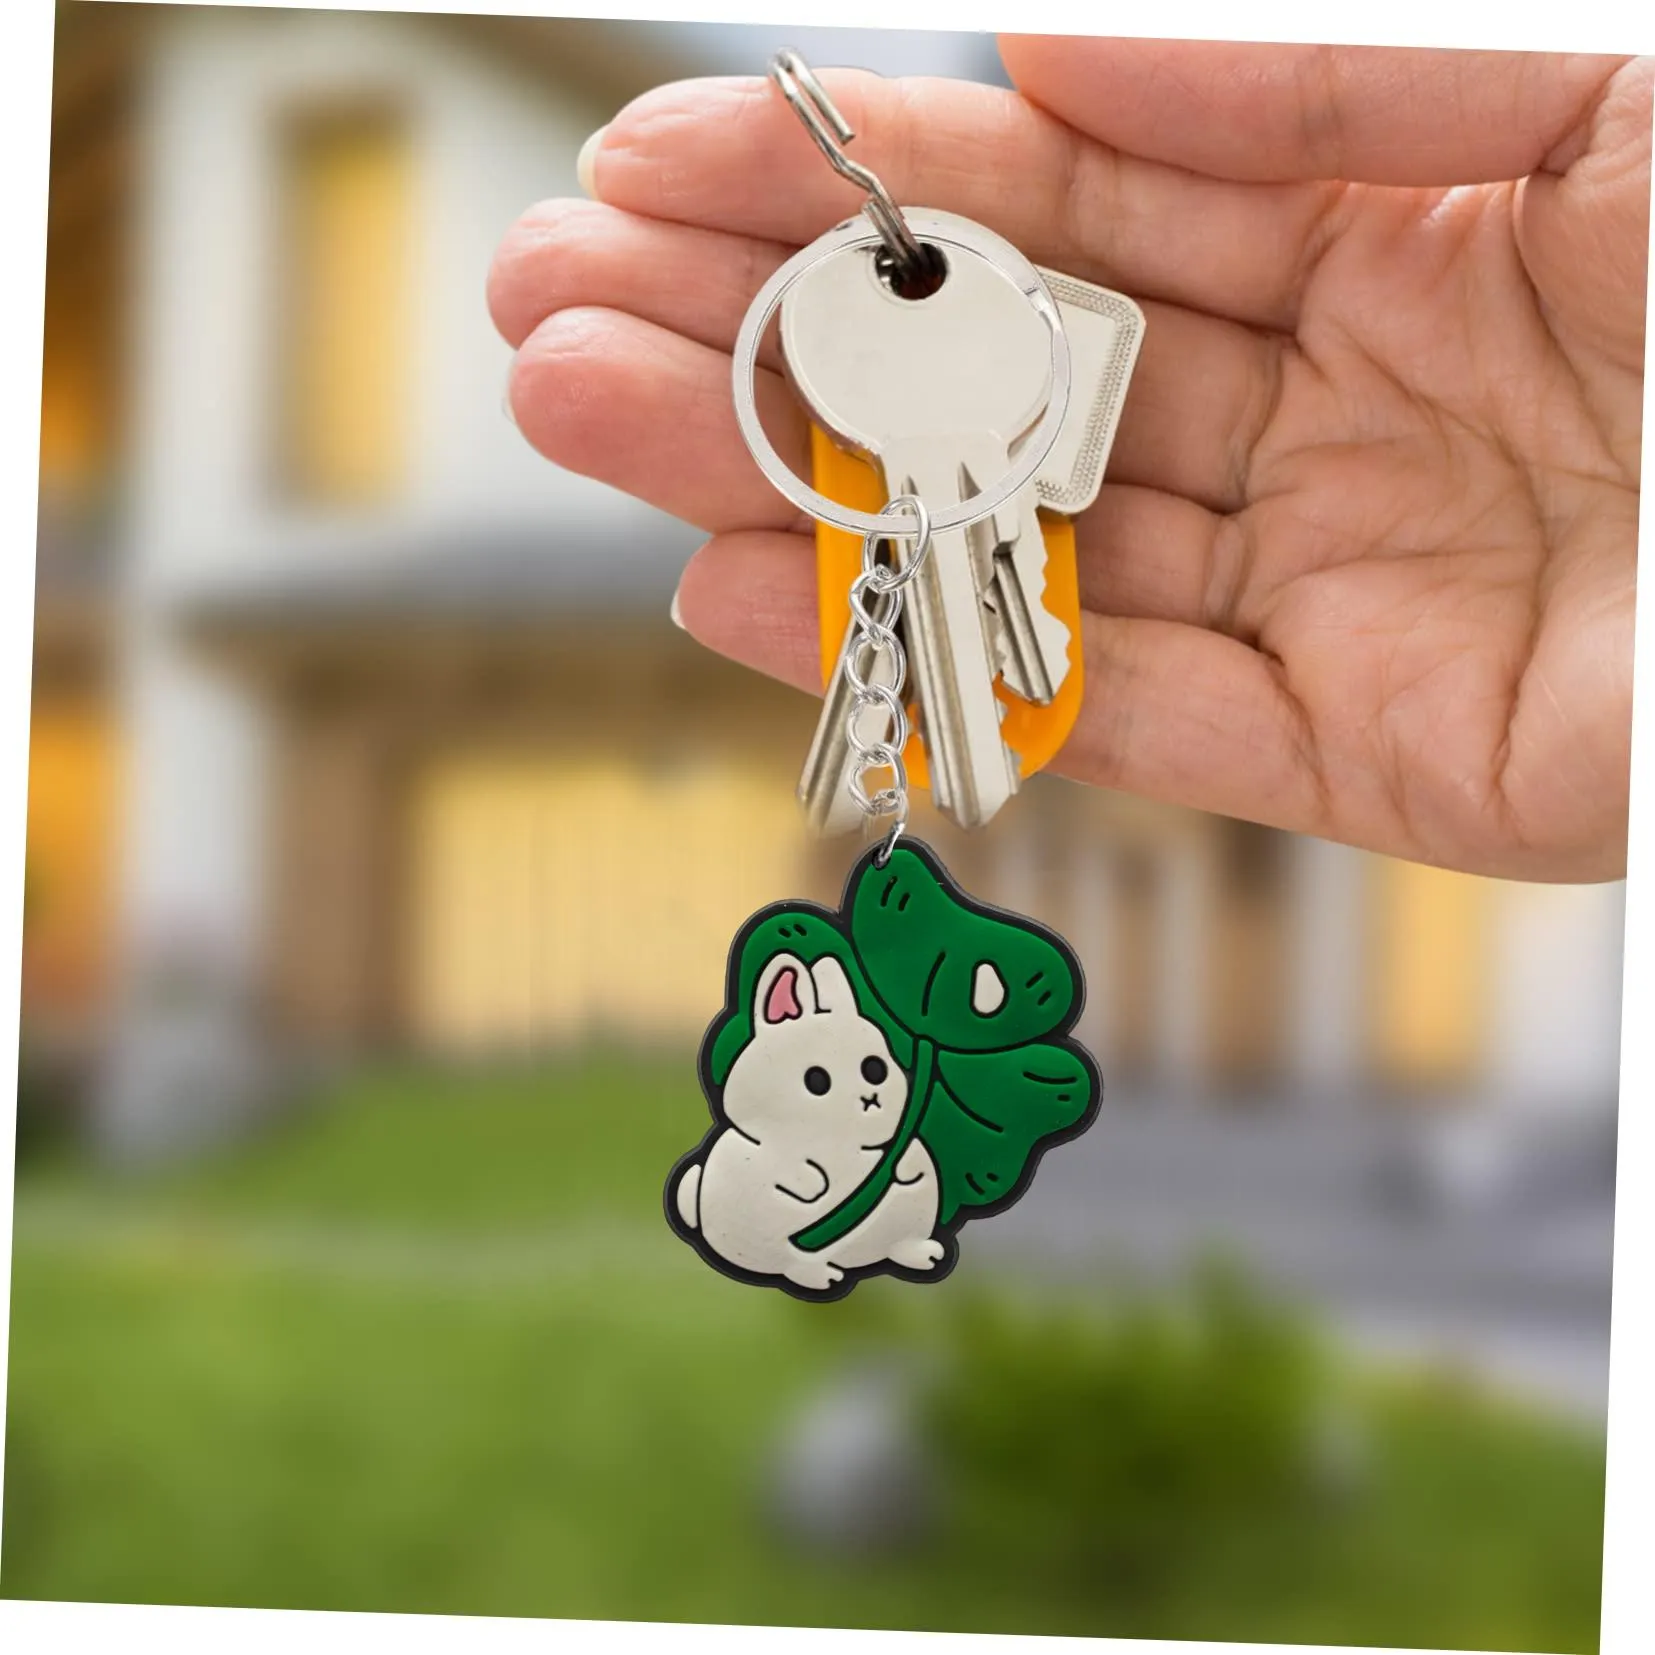 white rabbit keychain keychains for childrens party favors key rings cool colorful anime character with wristlet keyring suitable schoolbag cute silicone chain adult gift backpacks